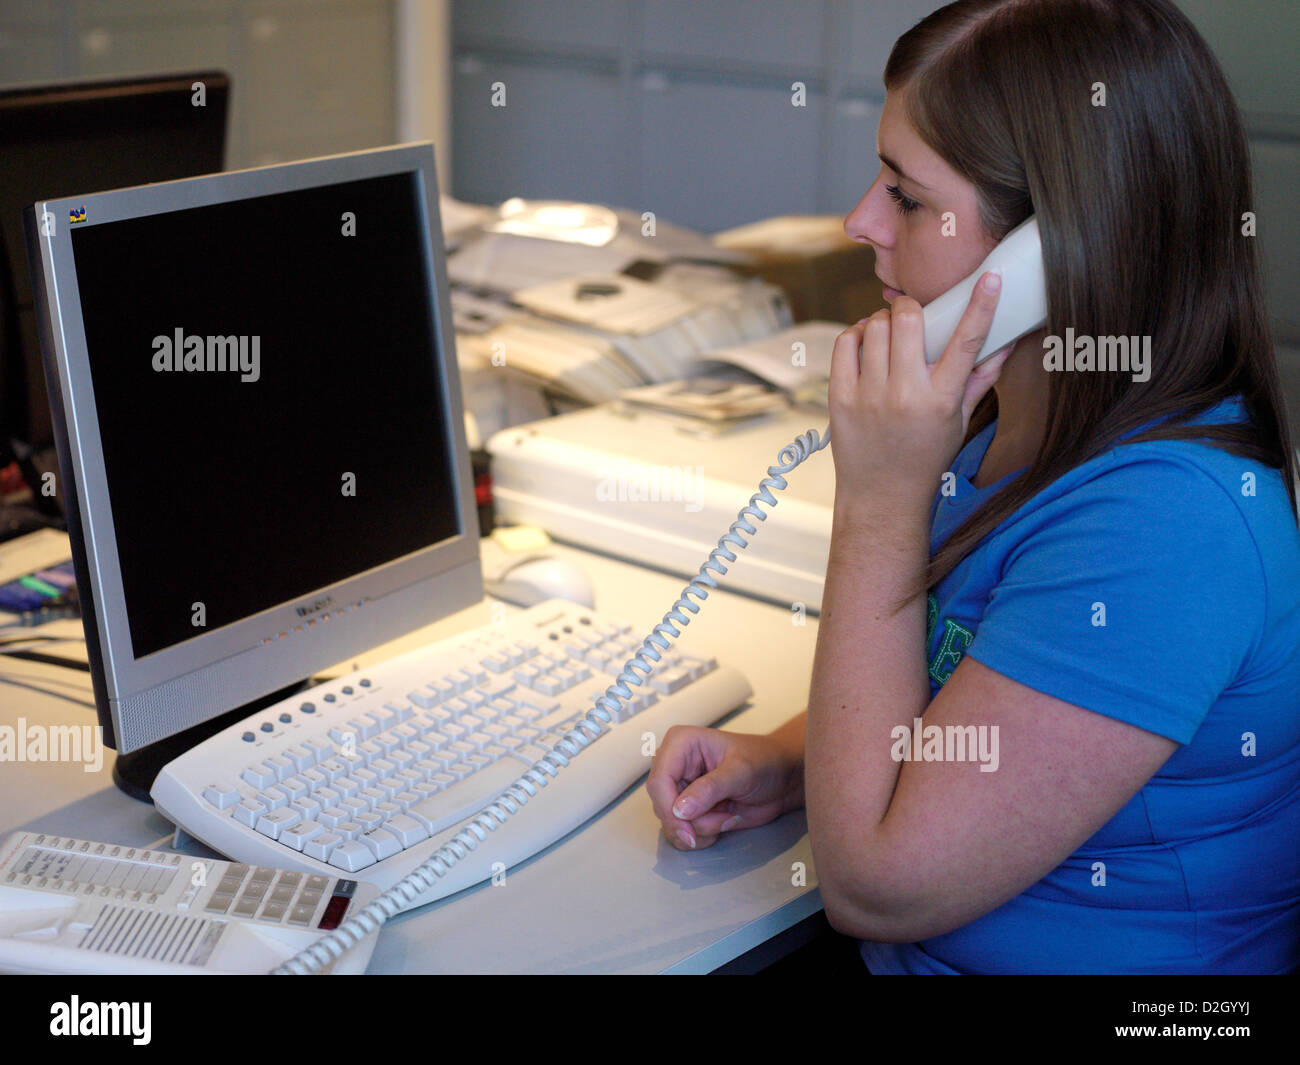 Young Woman Looking at a Blank Computer Screen and Holding a Corded Phone Stock Photo